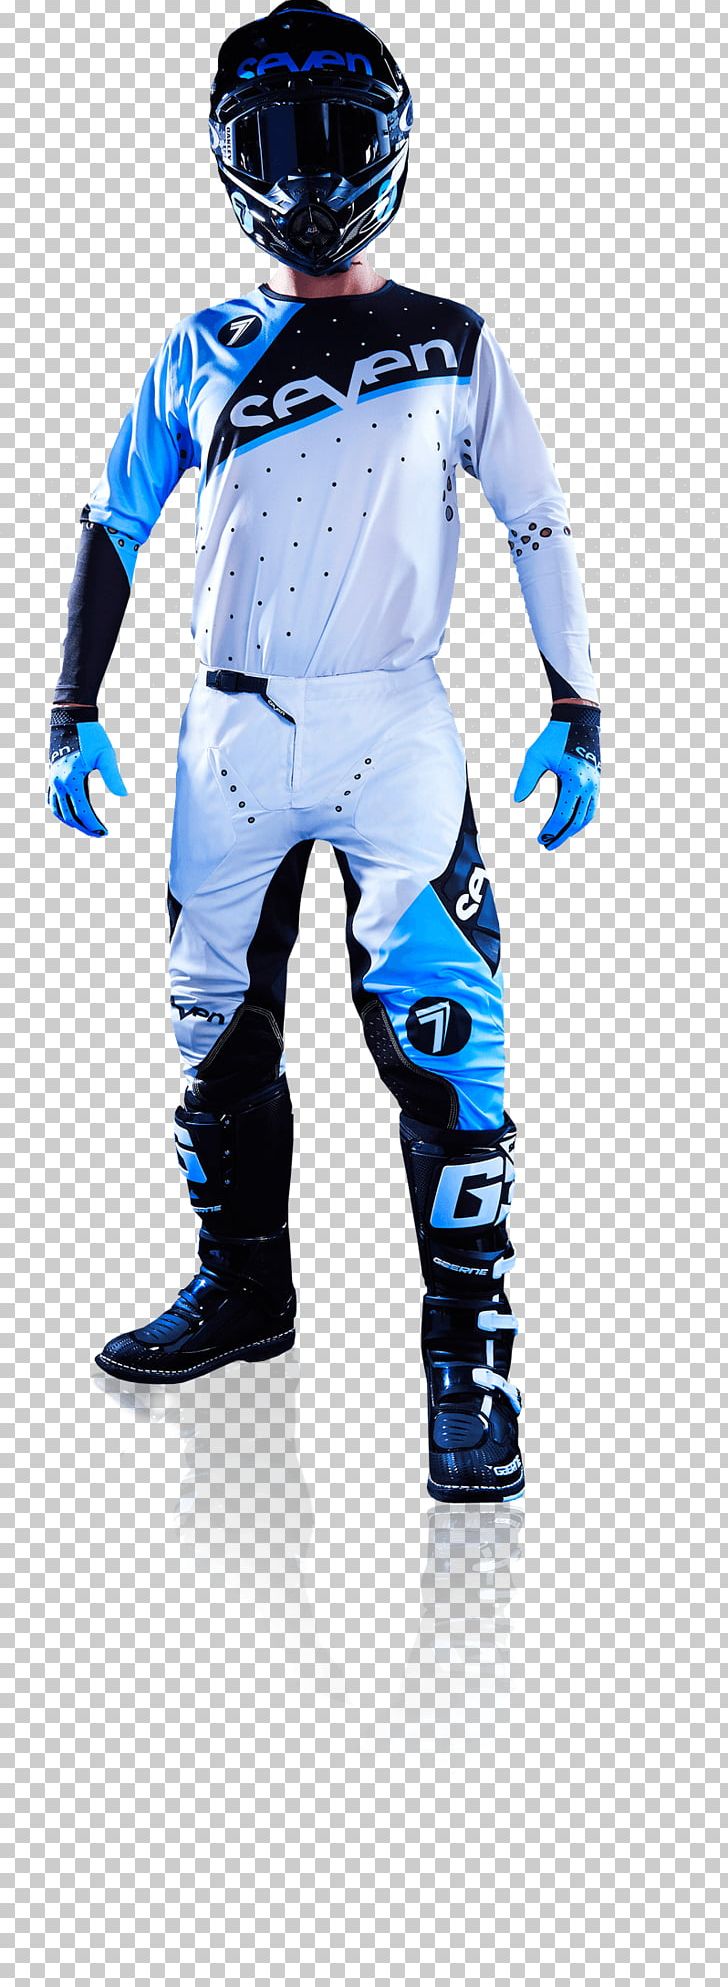 Jersey Motocross Pants Blue Clothing PNG, Clipart, Blue, Clothing, Costume, Dry Suit, Electric Blue Free PNG Download